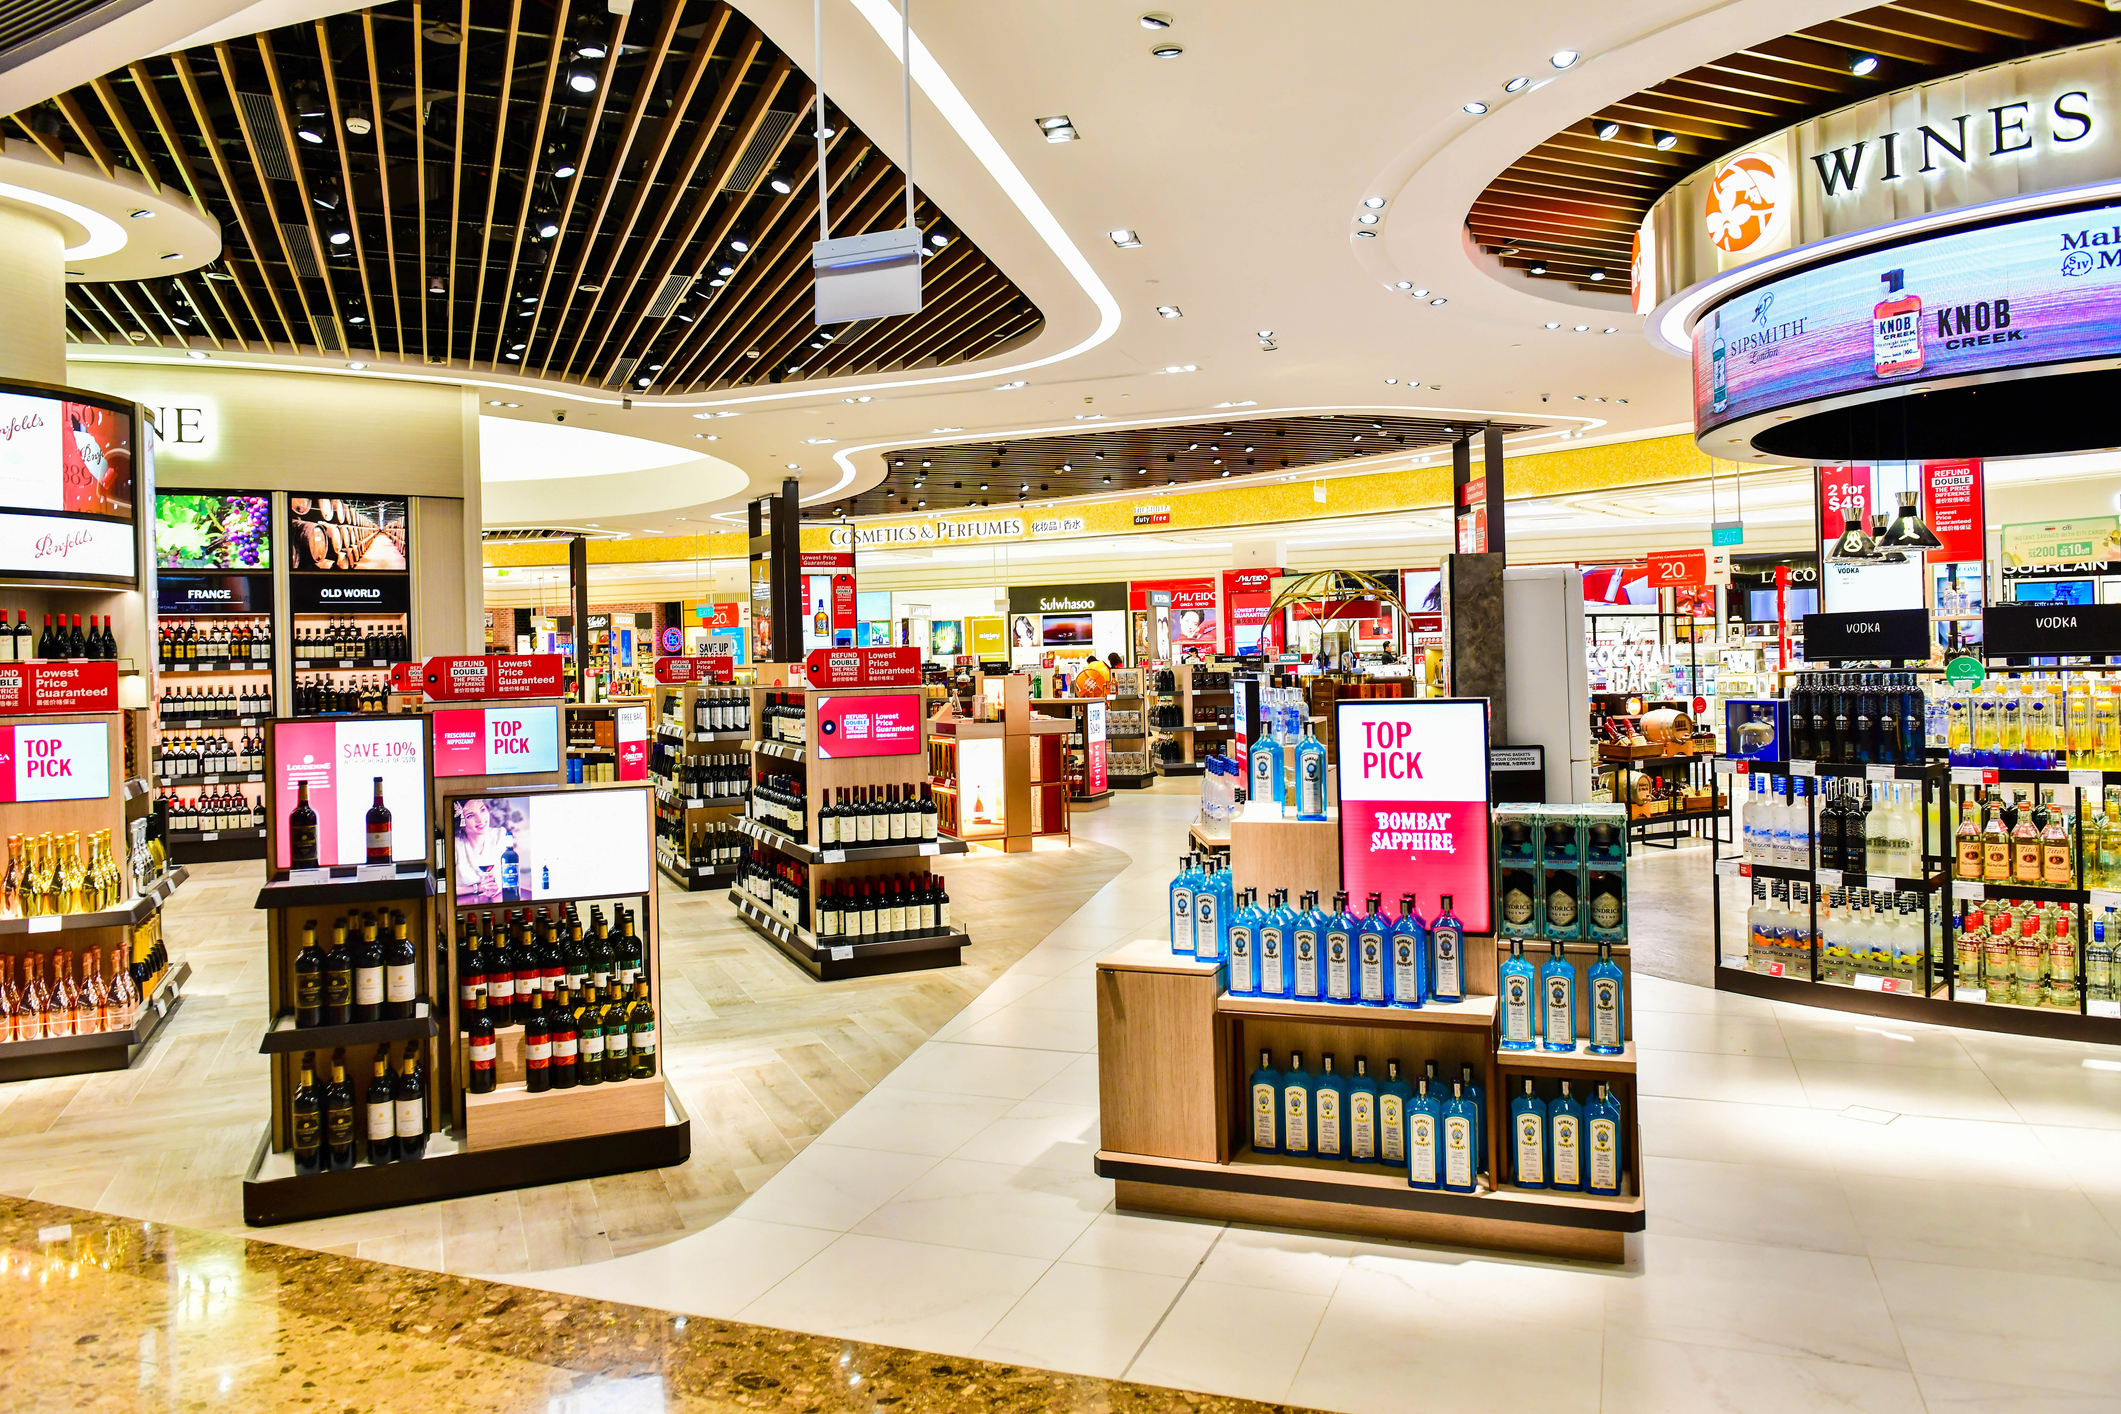 Duty-free shop at the airport